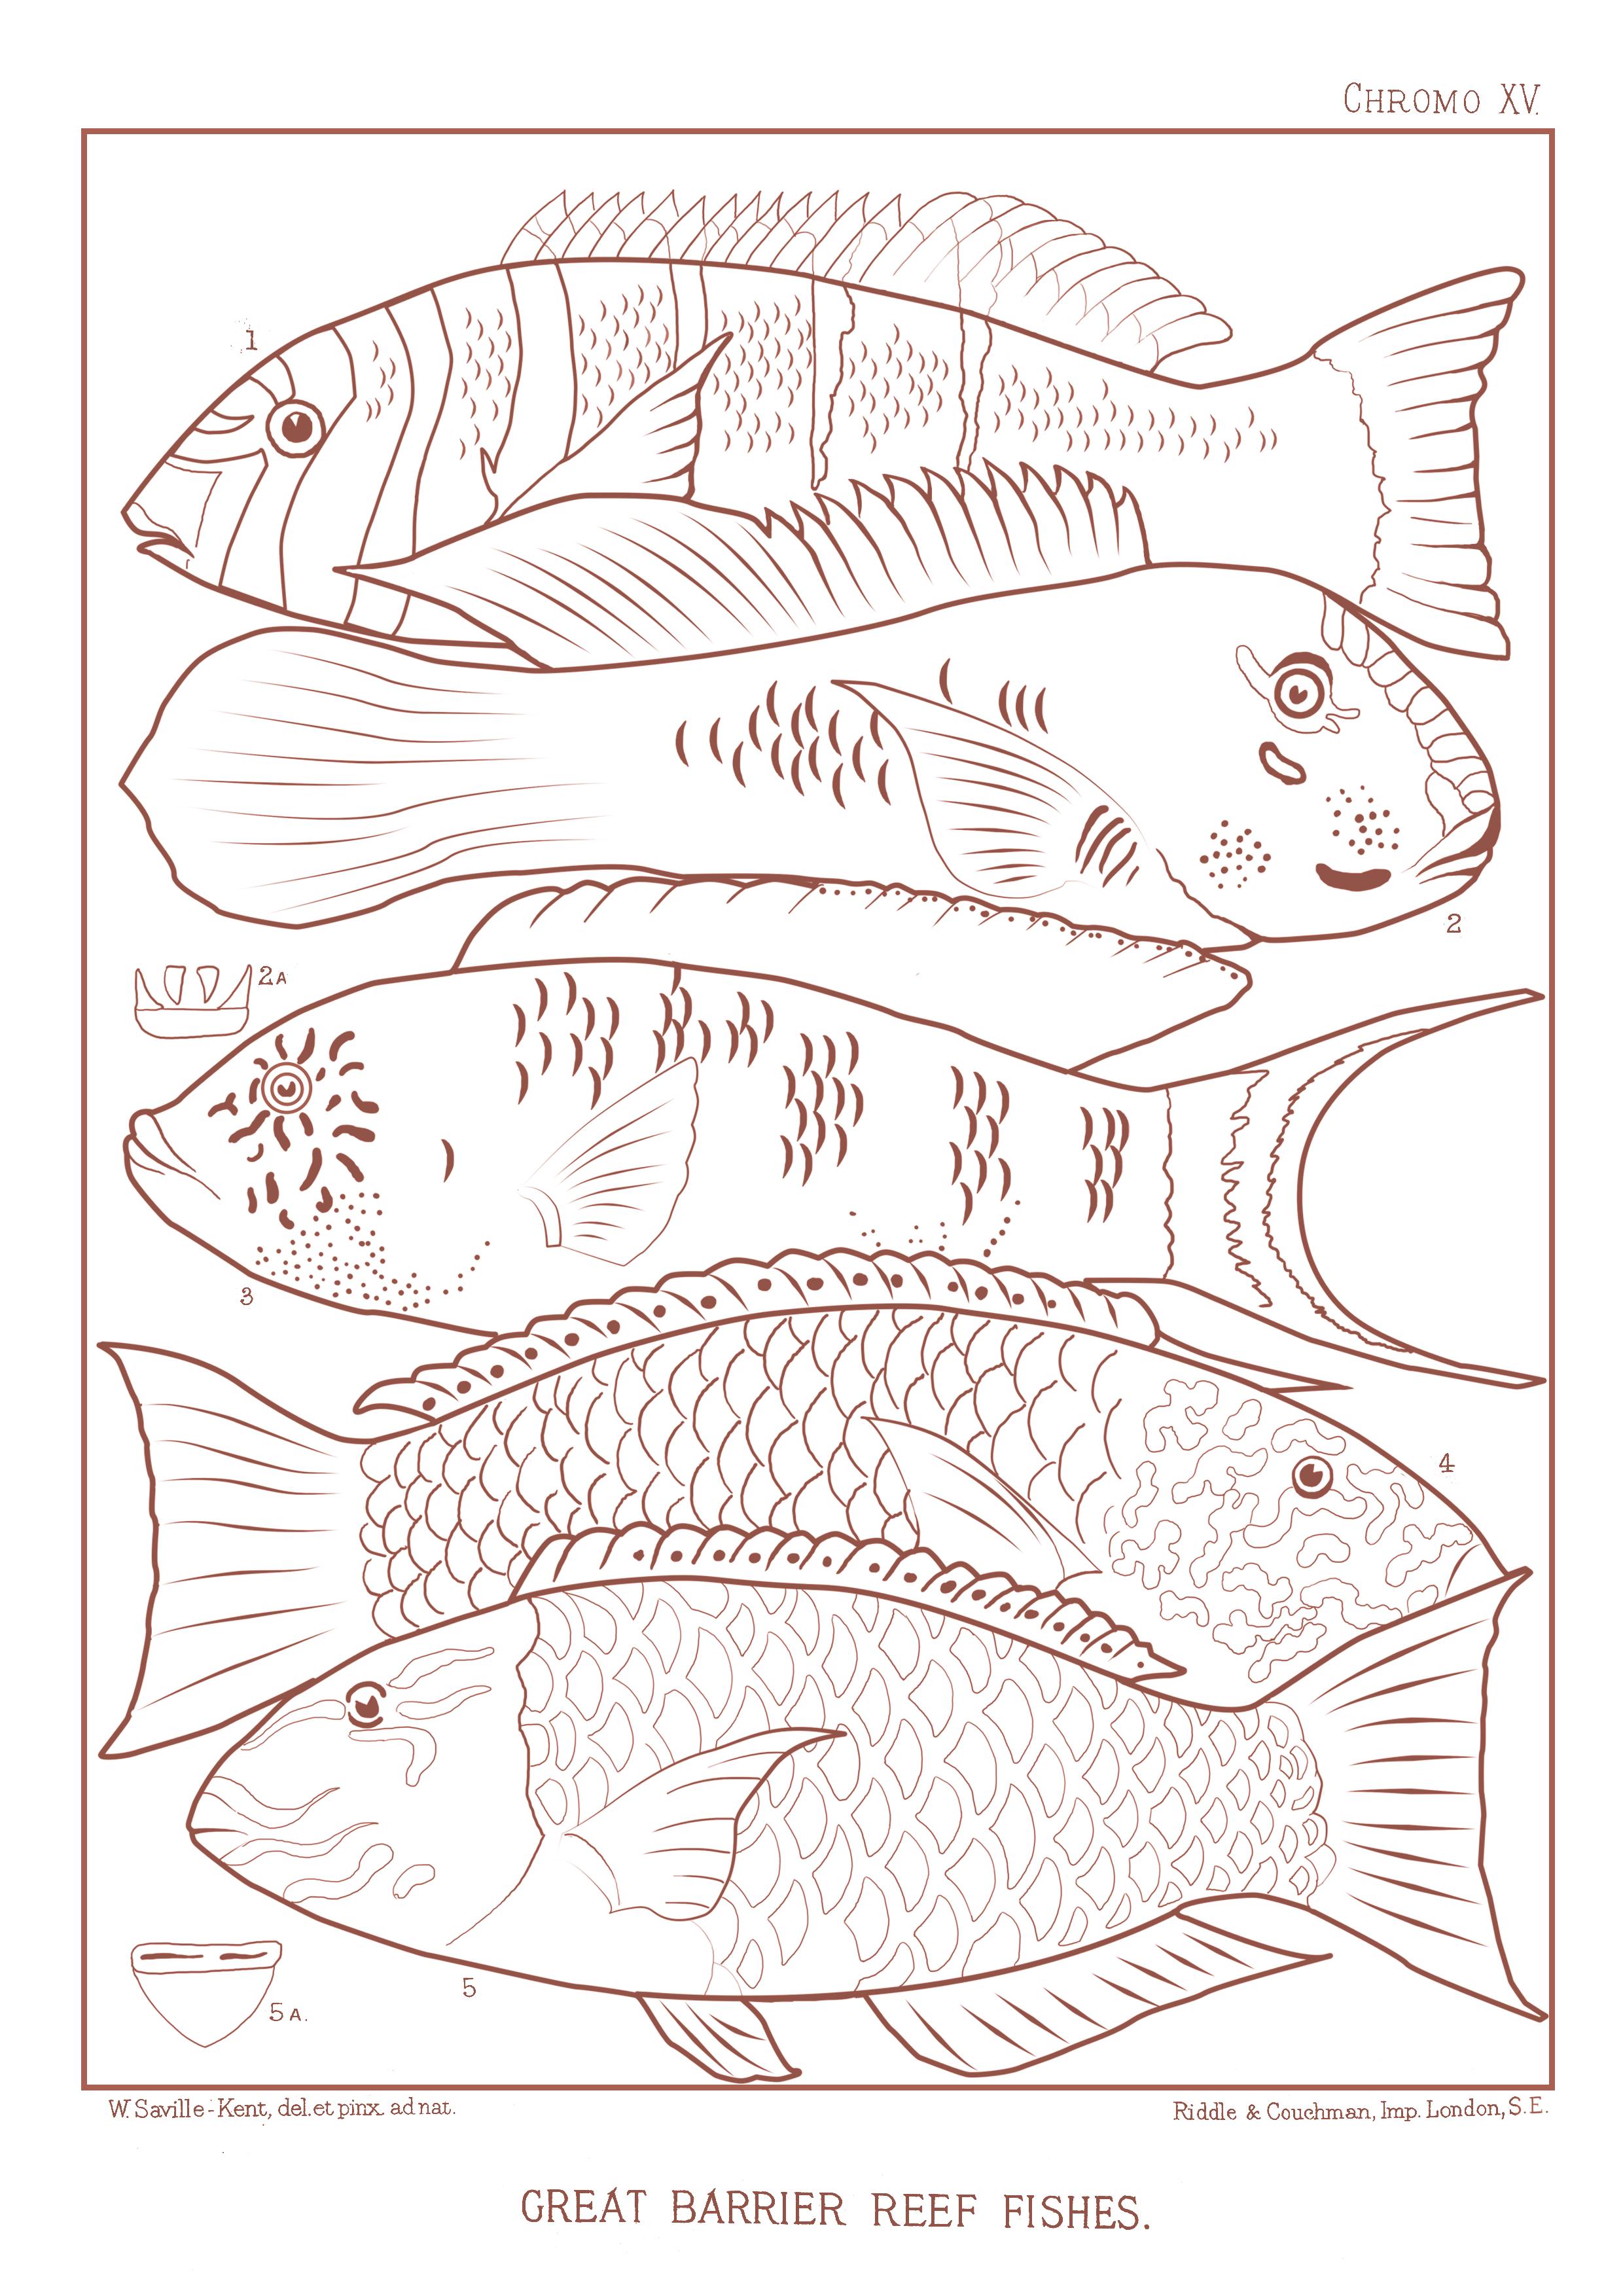 Drawing of 5 Great Barrier Reef fish.